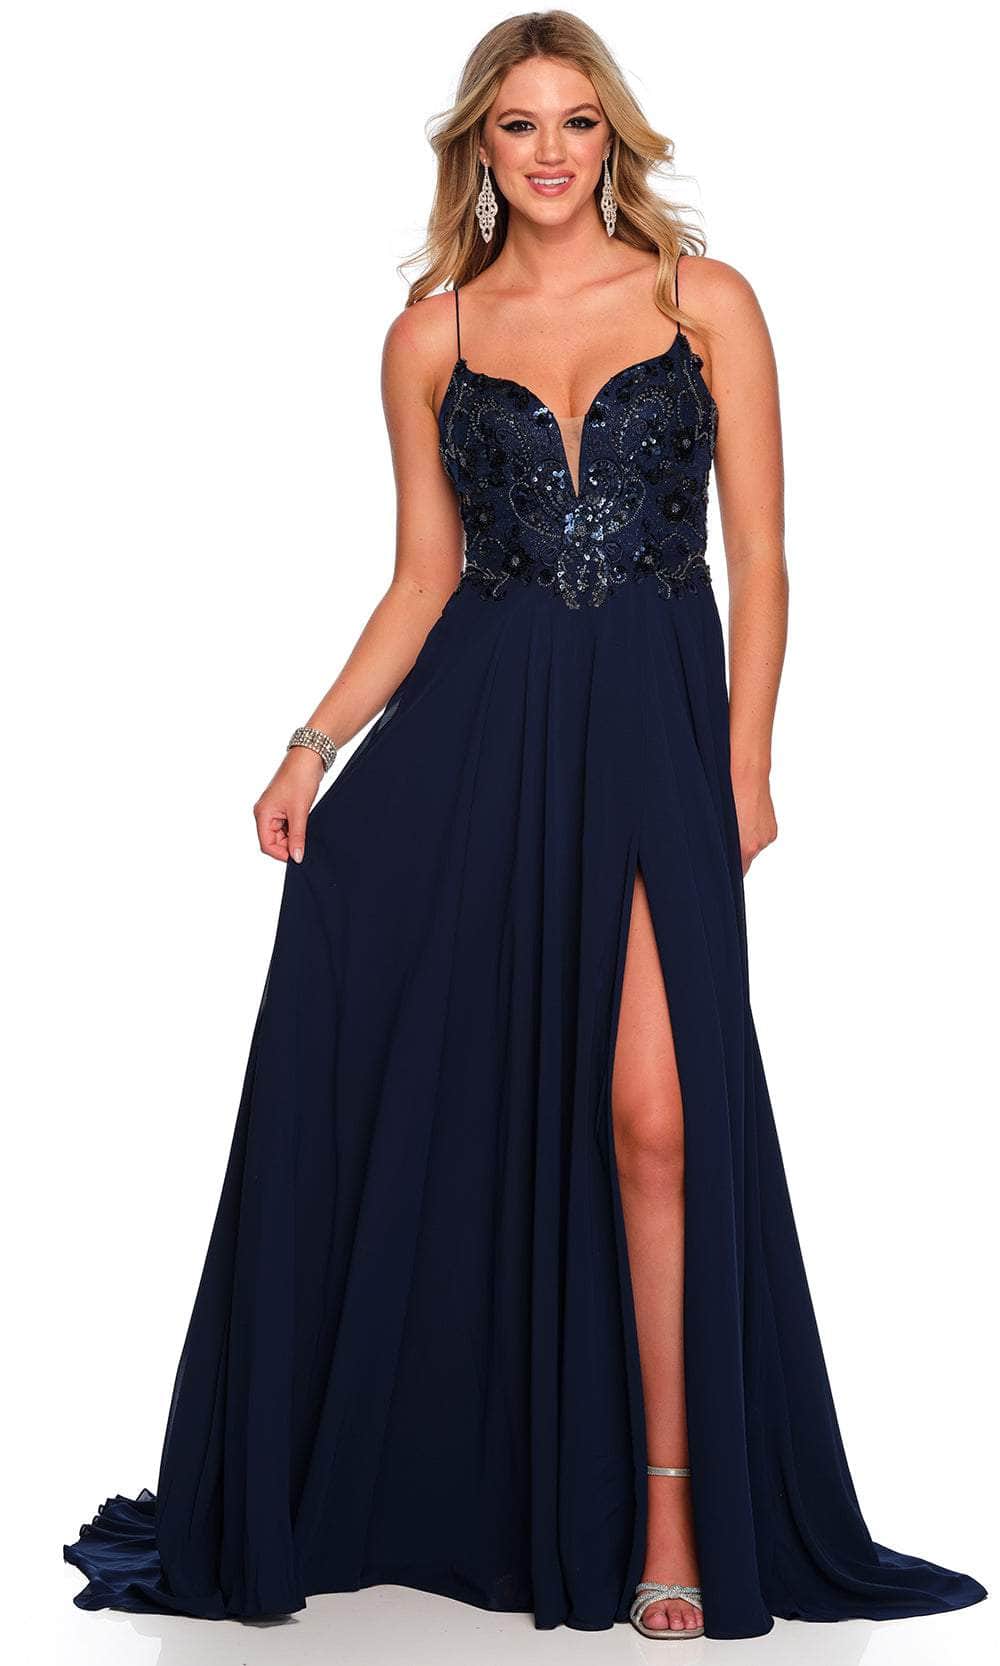 Dave & Johnny 11241 - Cutout Back Flowy A-Line Prom Gown
